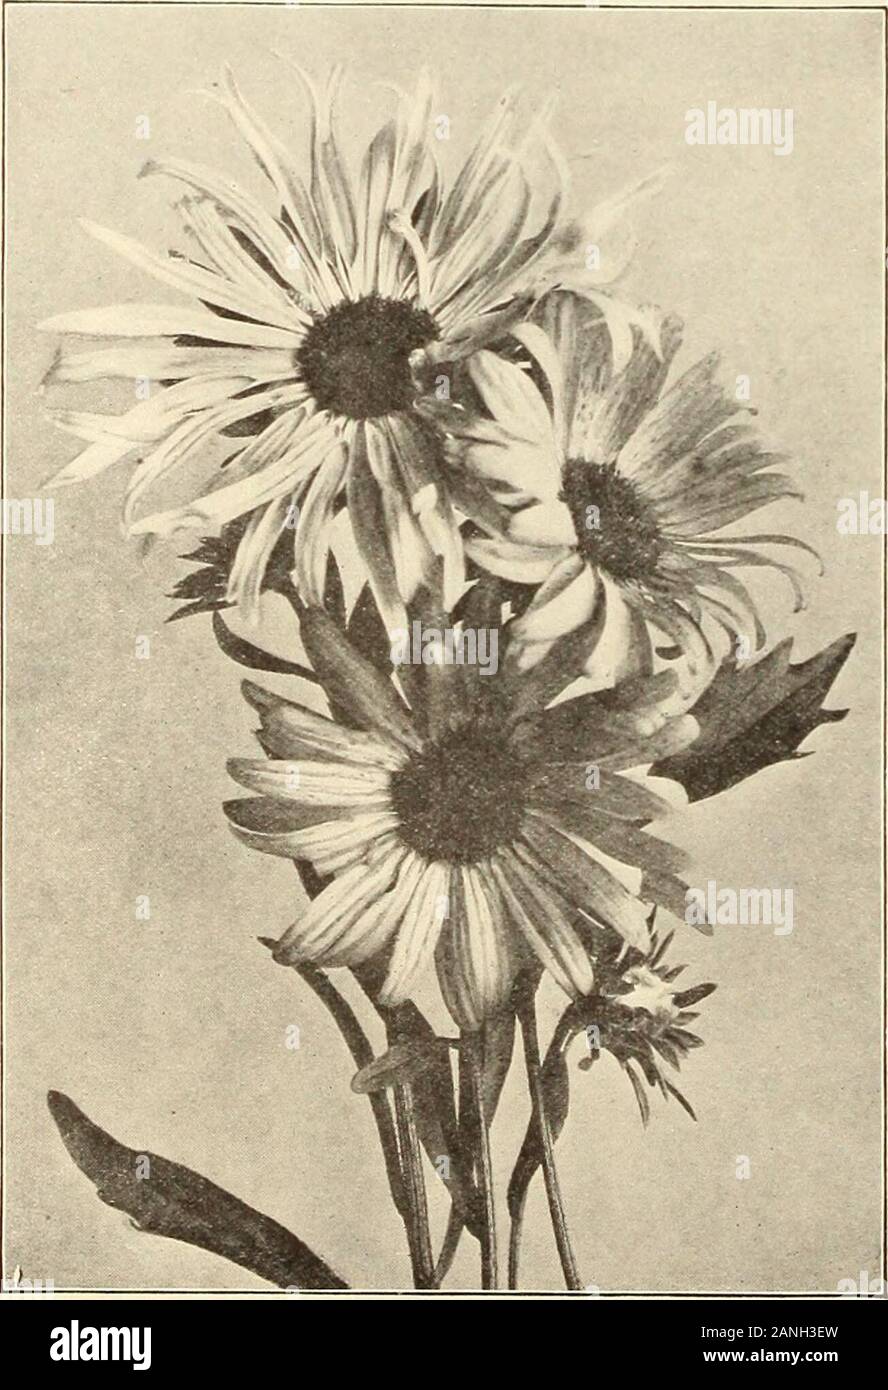 Farquhar's 1910 garden annual . Aster Victoria, No. 1105. Aster Hohenzollern, Ho. 860, RAY. A new type of Aster, with immense flowers, often meas-uring 4 inches in diameter. The petals are long and beauti-fully quilled. If the blooms are cut before they are fullyexpanded tliey will last almost a week in water. 2 feet. 10S5 White ; 1090 Pink ; 1005 Dark Blue ; 1100 Mixed.F.nch of the above colors and mixed. 4- /., 1.00: Pkt., .10 Aster Daybreak, No. 855. VICTORIA, The flowers are of enormous size, very double,with the petals beautifully recurved. For bedding or exhibi-tion, the Victoria is unri Stock Photo